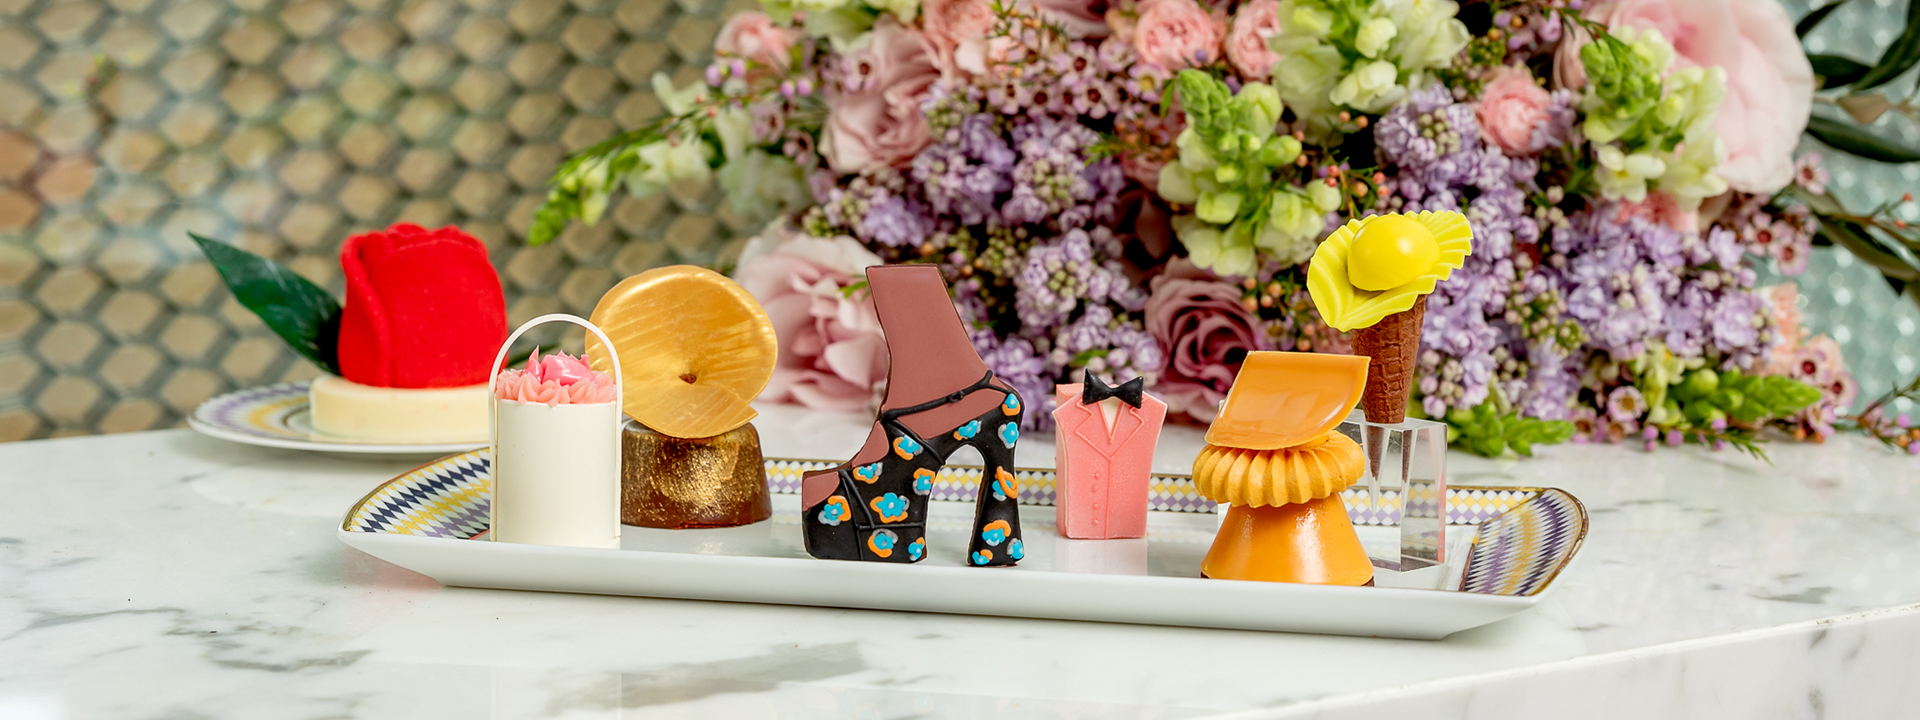 Pret a Portea Afternoon Tea at The Berkeley - selection of cakes which shapes are inspired from fashion shows